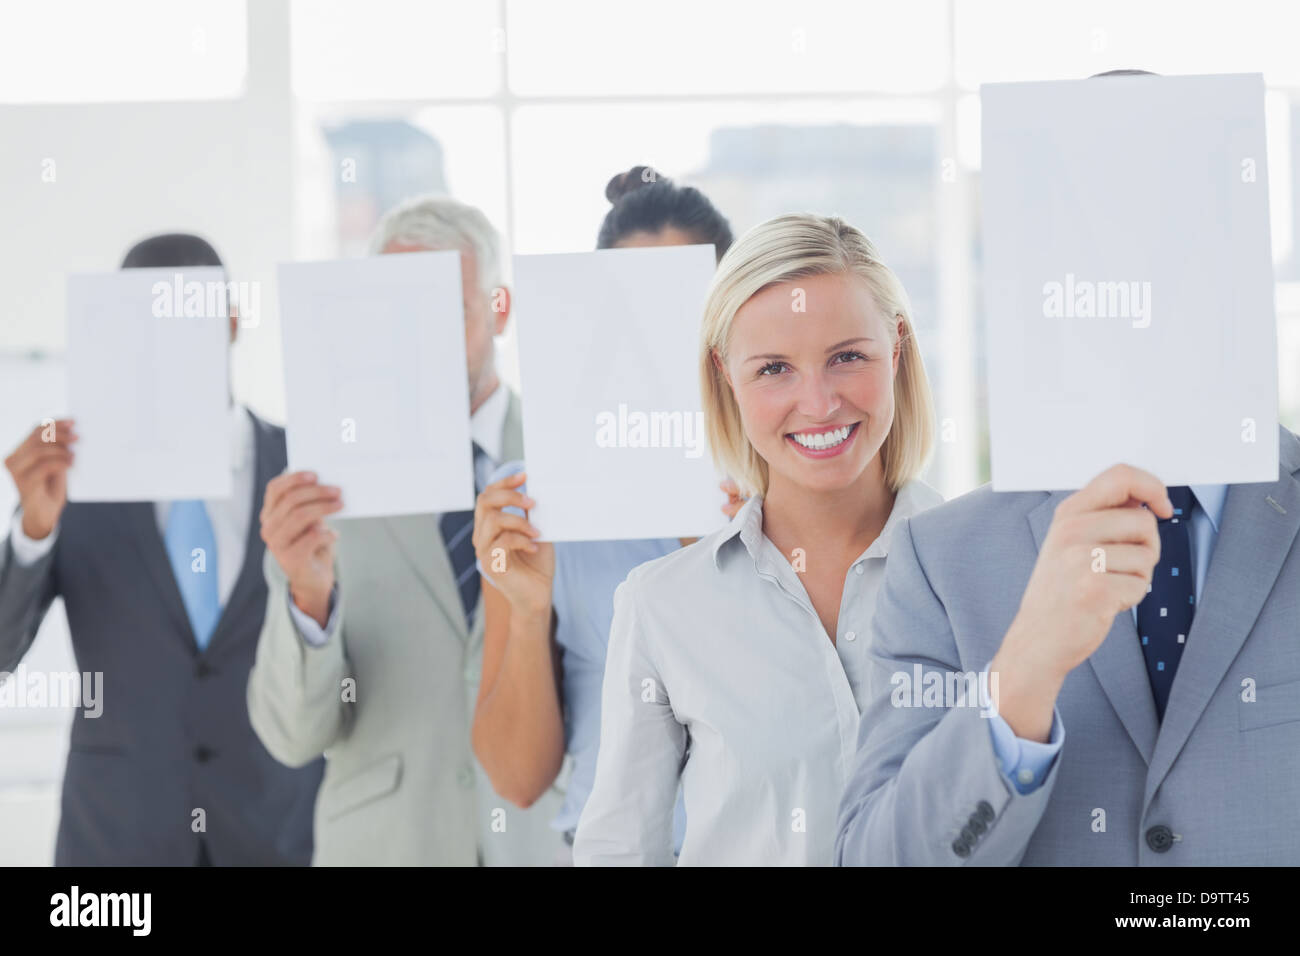 Business team covering face with white paper except for one woman Stock Photo